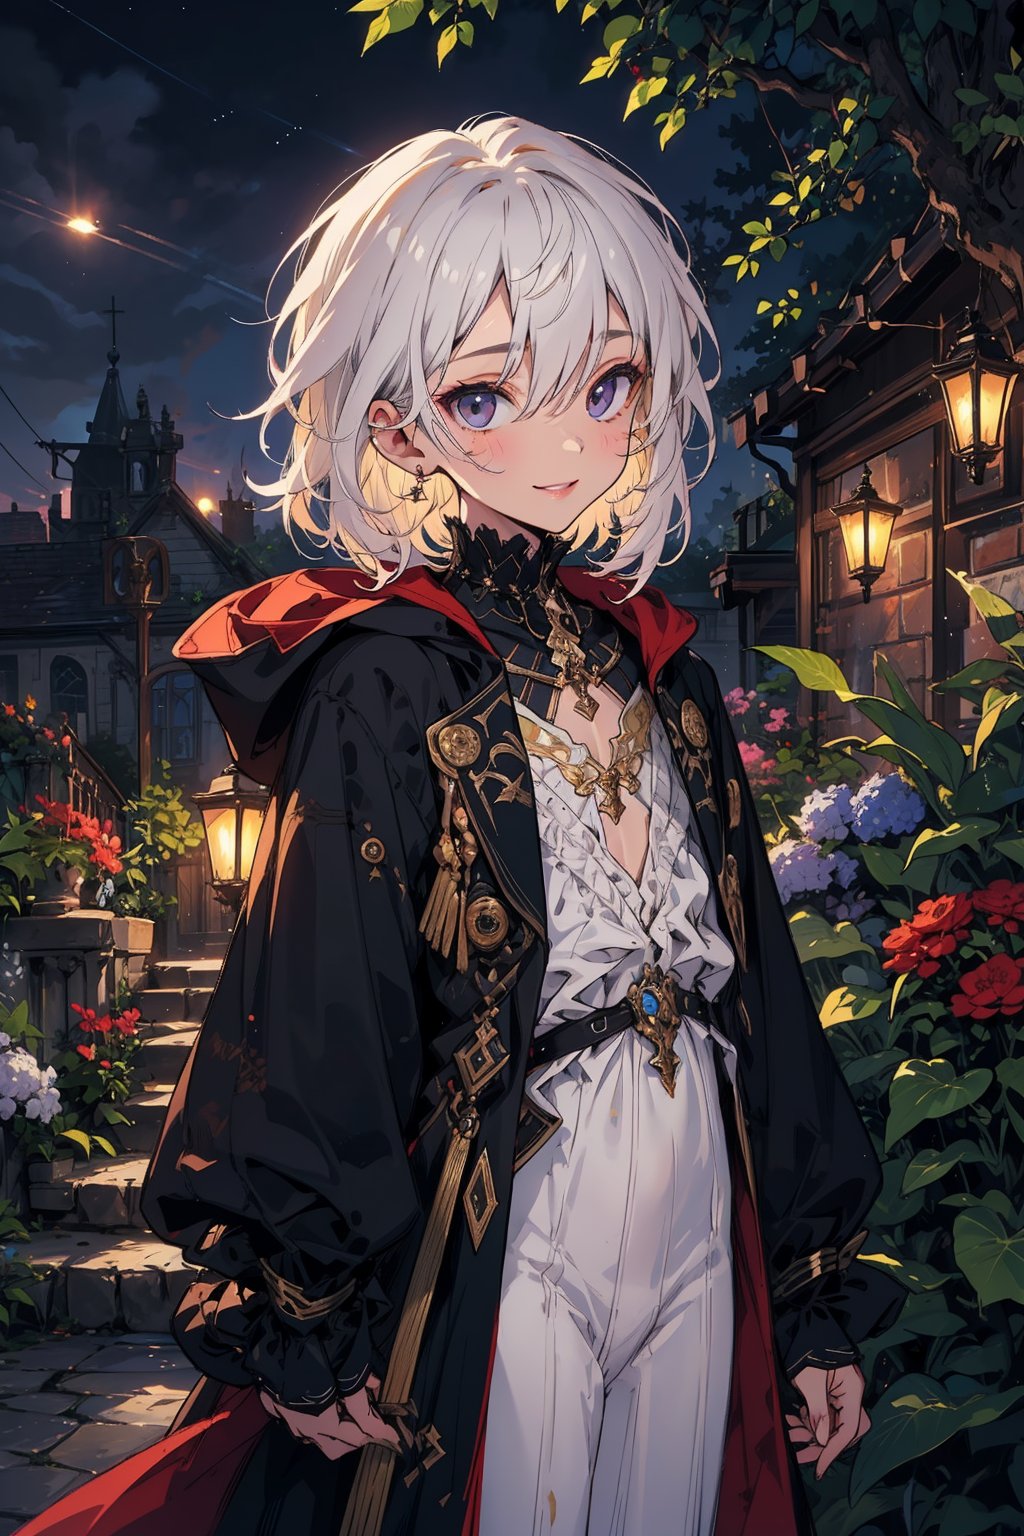 young_person, small_person, androgynous_look, flat_chest, white_hair, shoulder_length_hair, dark_eyes, uncertain_smile, very_slim, very_thin, close_up, fantasy_clothes, victorian_clothes, garden, night, dark_sky, small_body, white_robe, hermaphroditic_look, hermaphrodite, white_clothes, gold_marks, boyish_look, young_boy, tomboy, masculine_lips, masculine_features